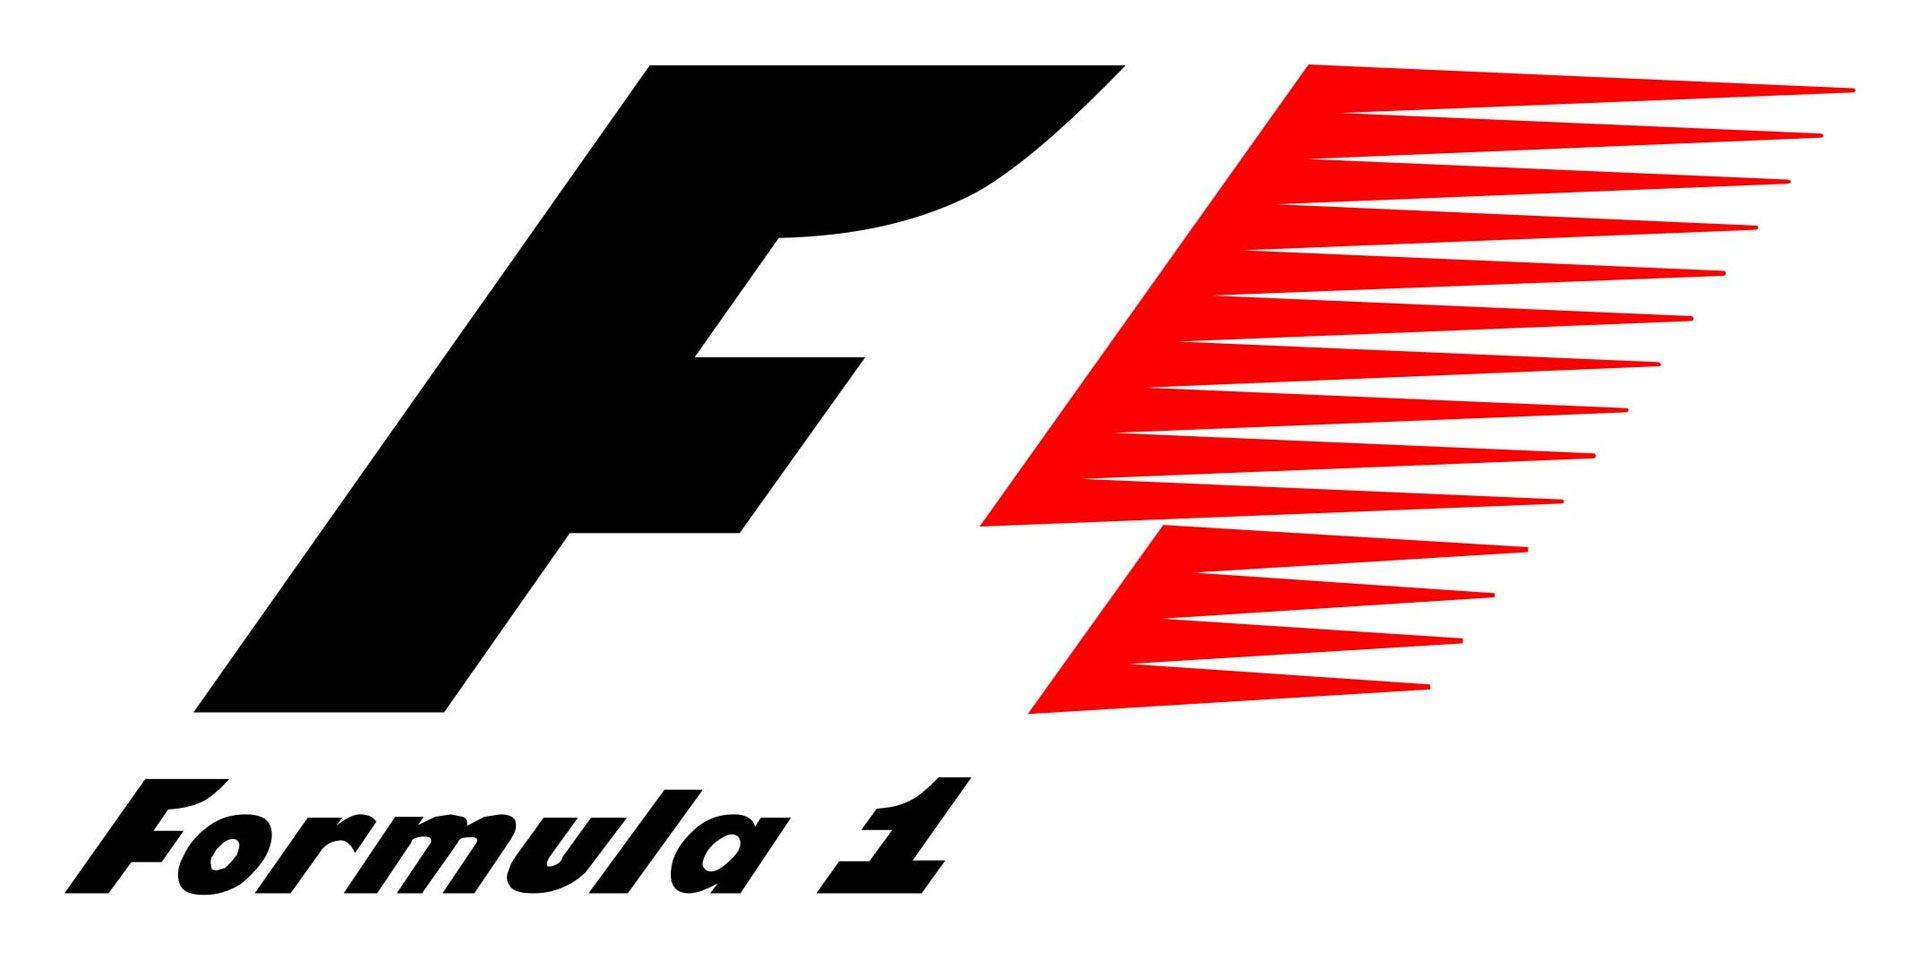 Formula 1 Logo - Old F1 logo was neither iconic nor memorable · RaceFans